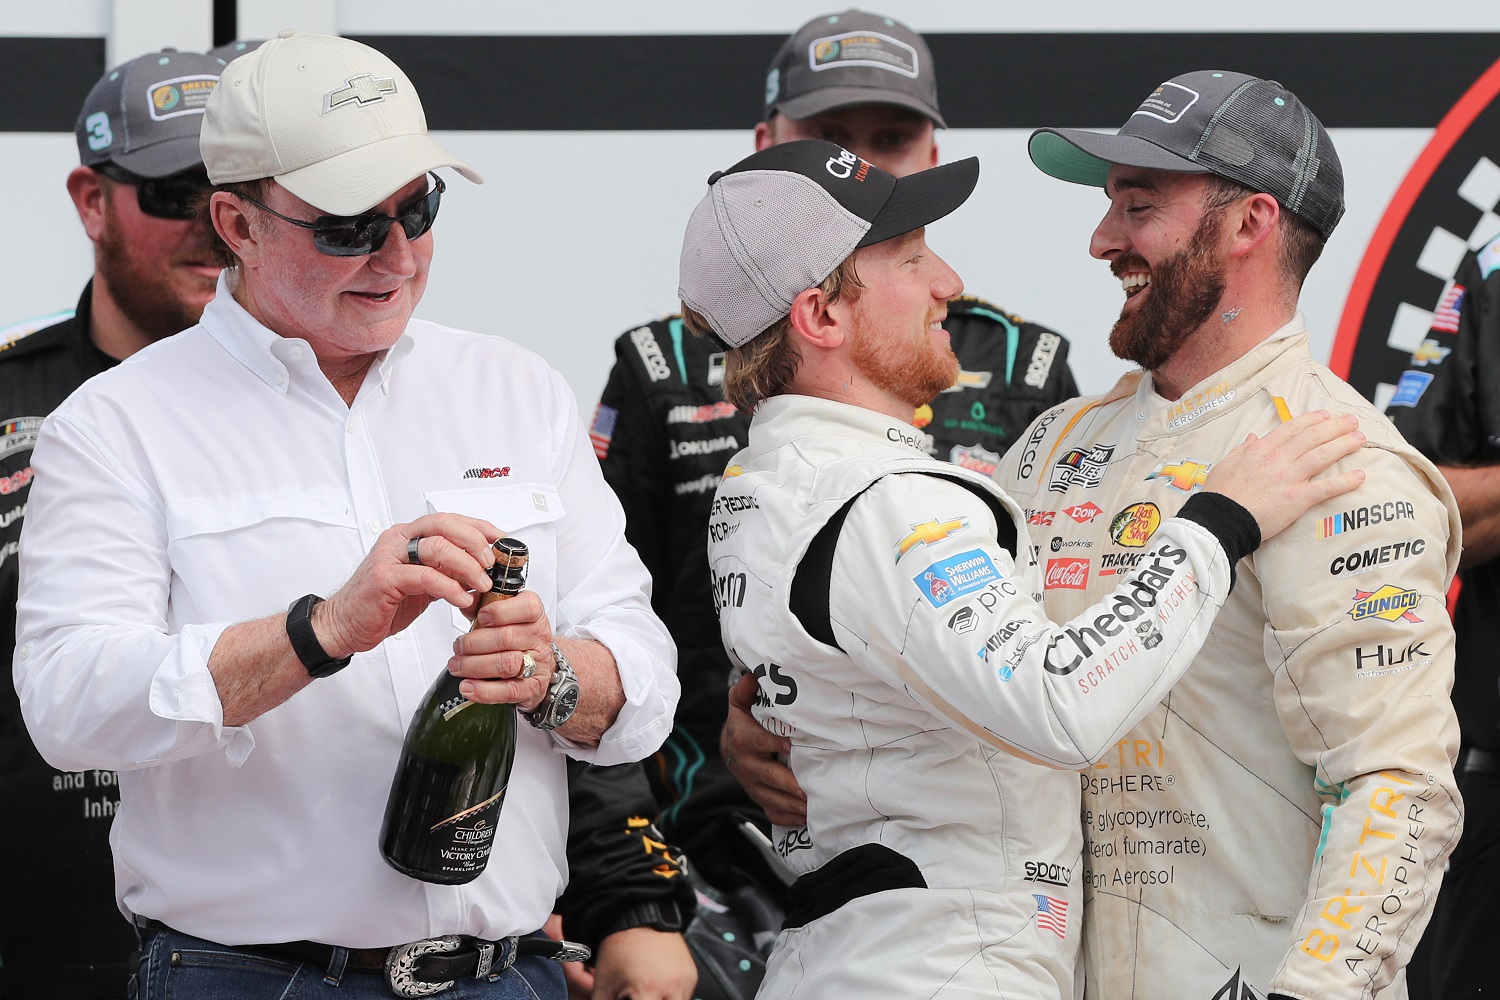 Austin Dillon is congratulated by Tyler Reddick as team owner Richard Childress looks on after the NASCAR Cup Series Coke Zero Sugar 400 at Daytona International Speedway on Aug. 28, 2022. | Meg Oliphant/Getty Images